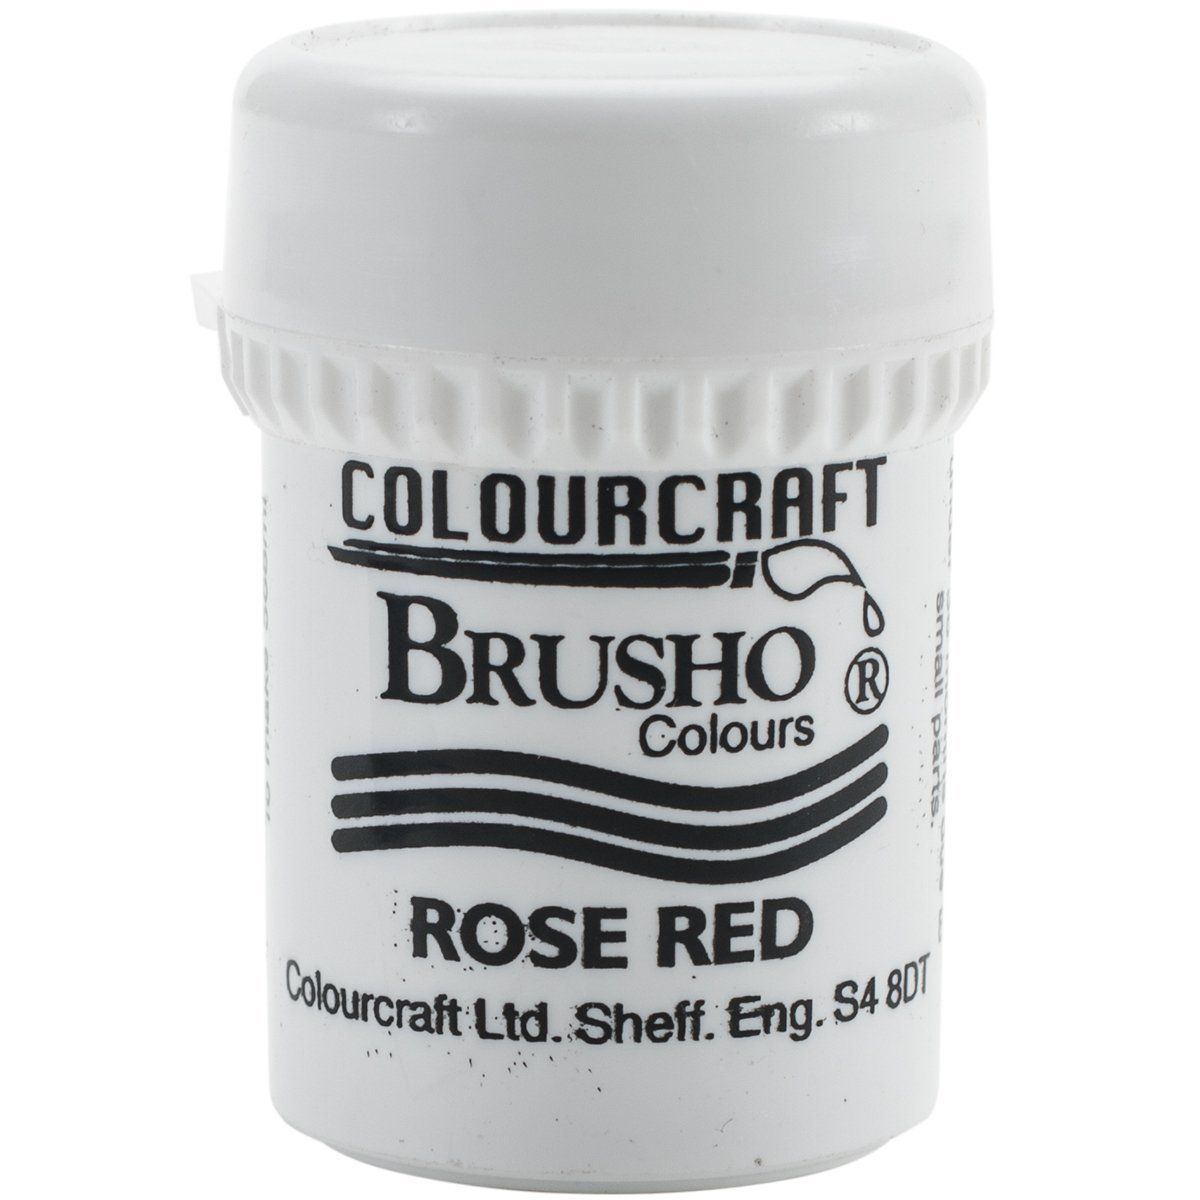 Brusho Crystal Colour - Rose Red 15 gm